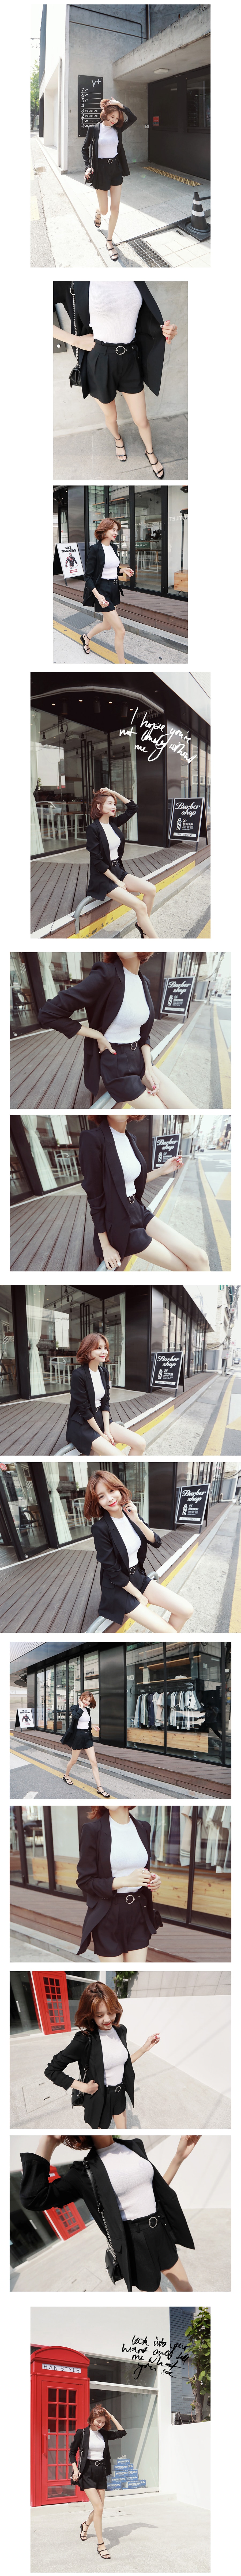 [Limited Quantity Sale] One Button Summer Chic Jacket #Black One Size(S-M)